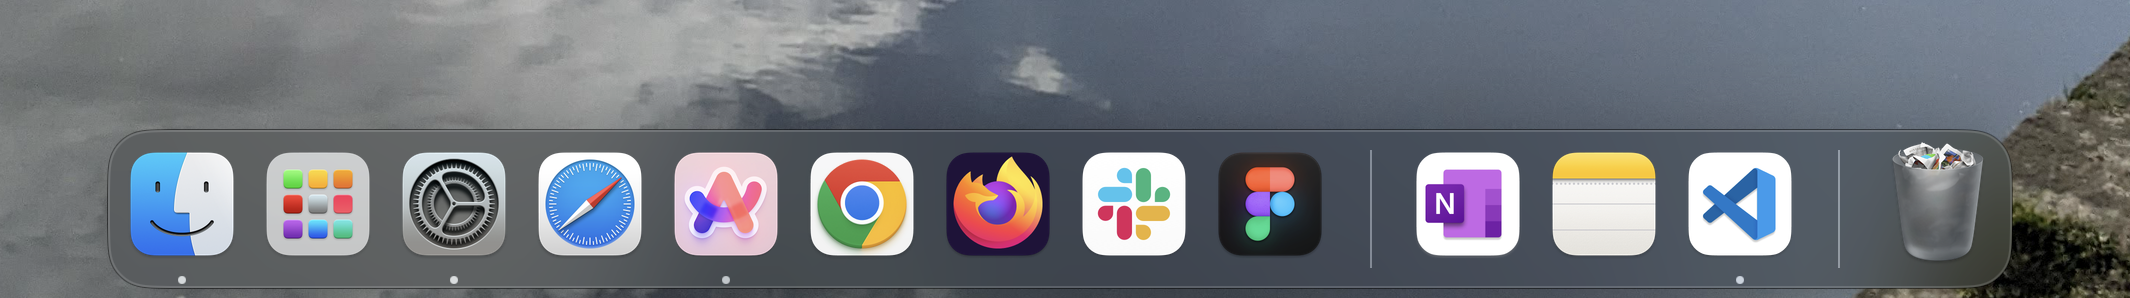 A screenshot of my macOS dock, showing shortcuts for Finder, System Settings, Safari, Arc, Chrome, Firefox, Figma and Slack